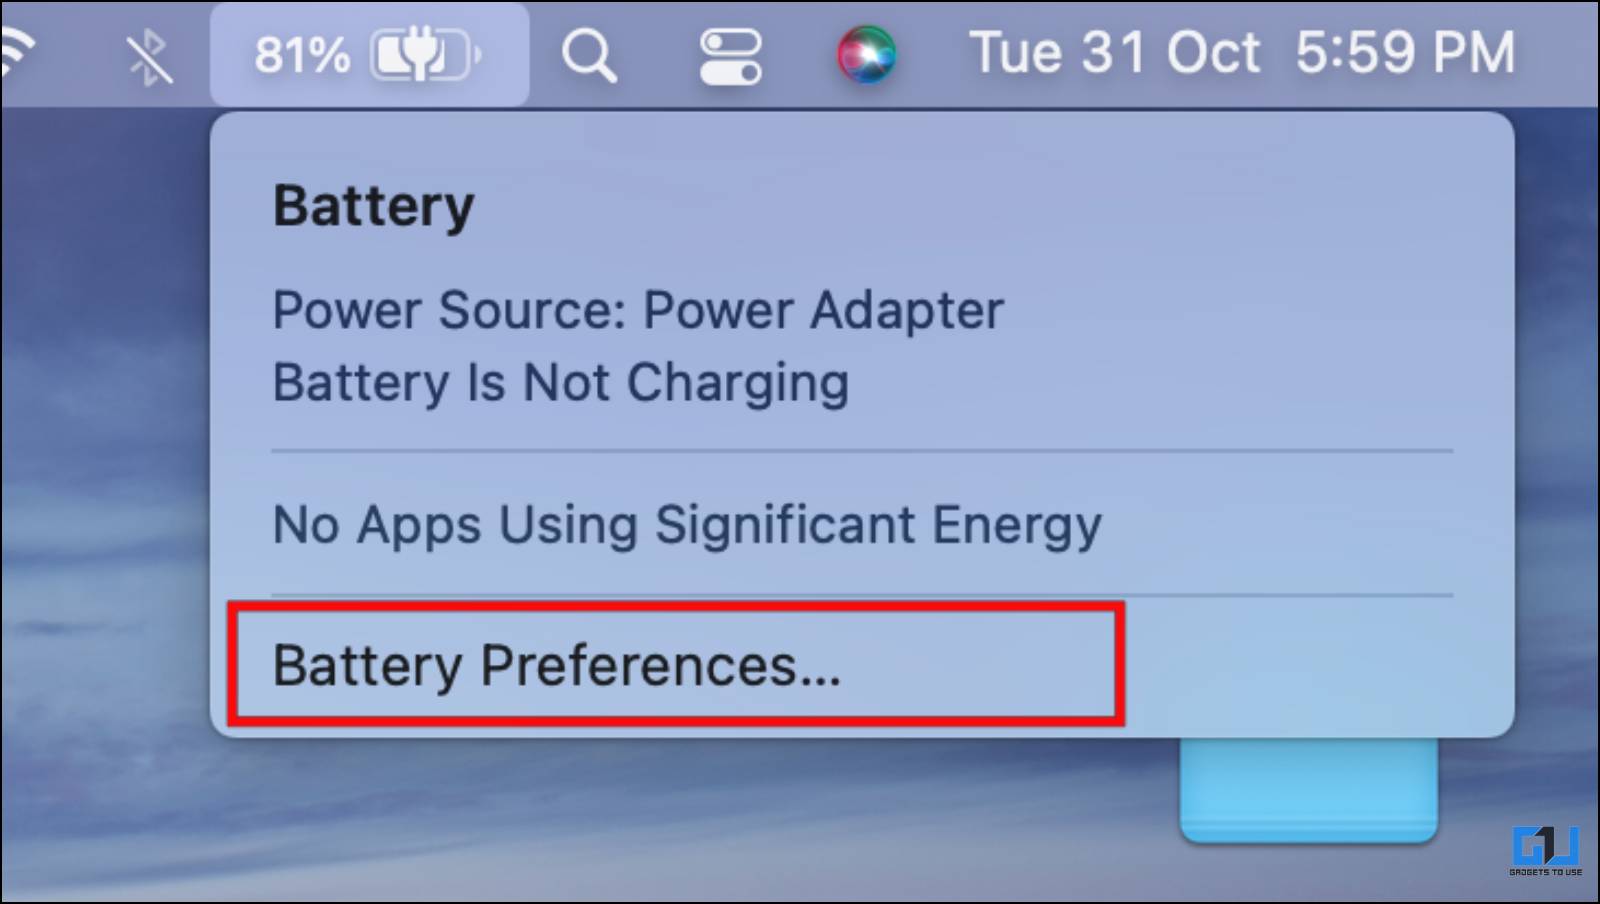 Go to Battery Preferences... option